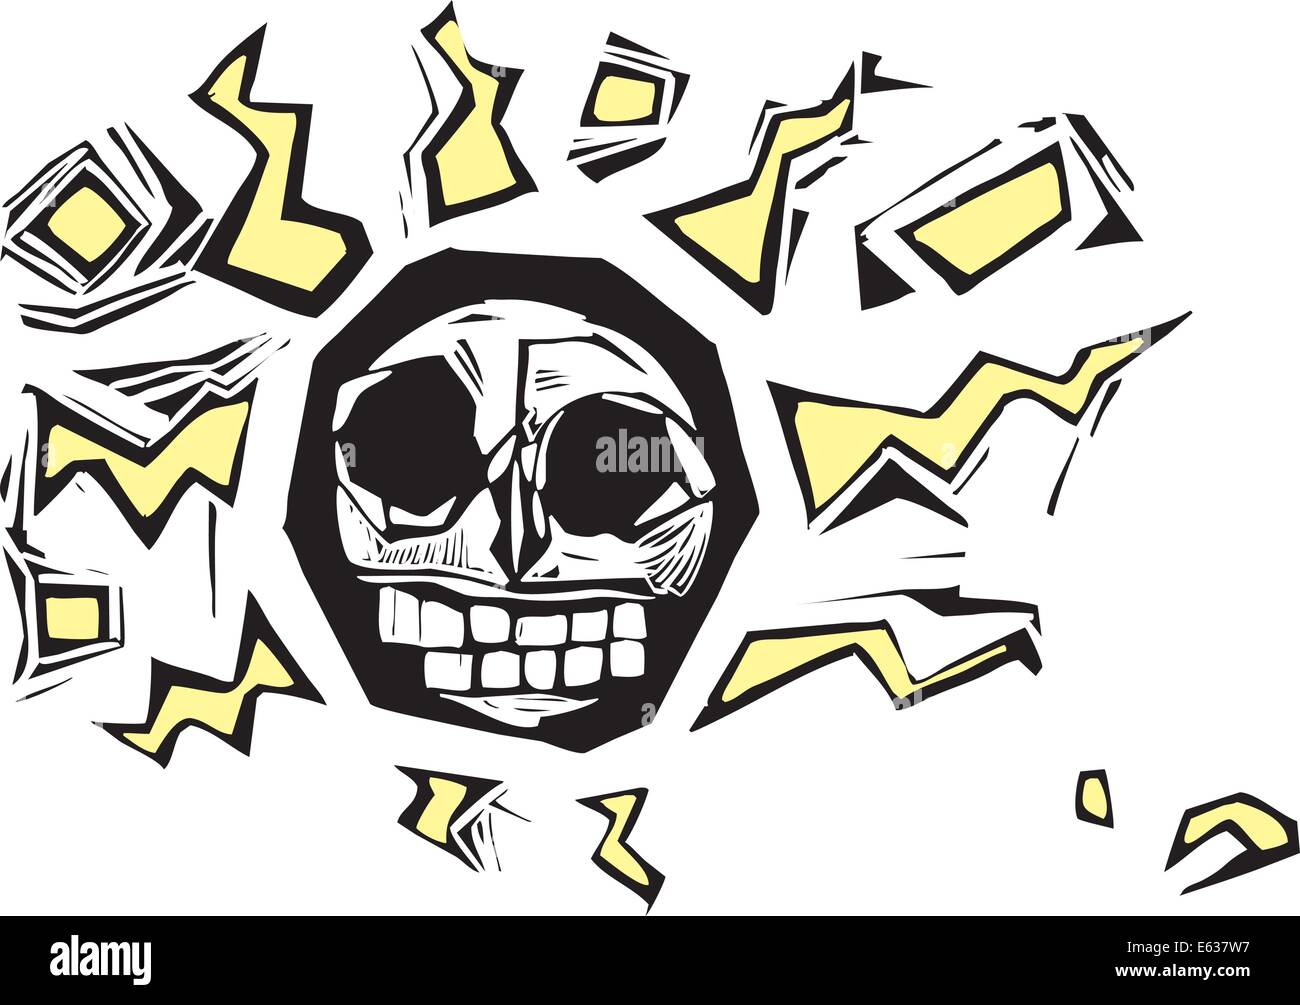 Stylized woodcut image of a skull with lightning bolts surrounding it. Stock Vector